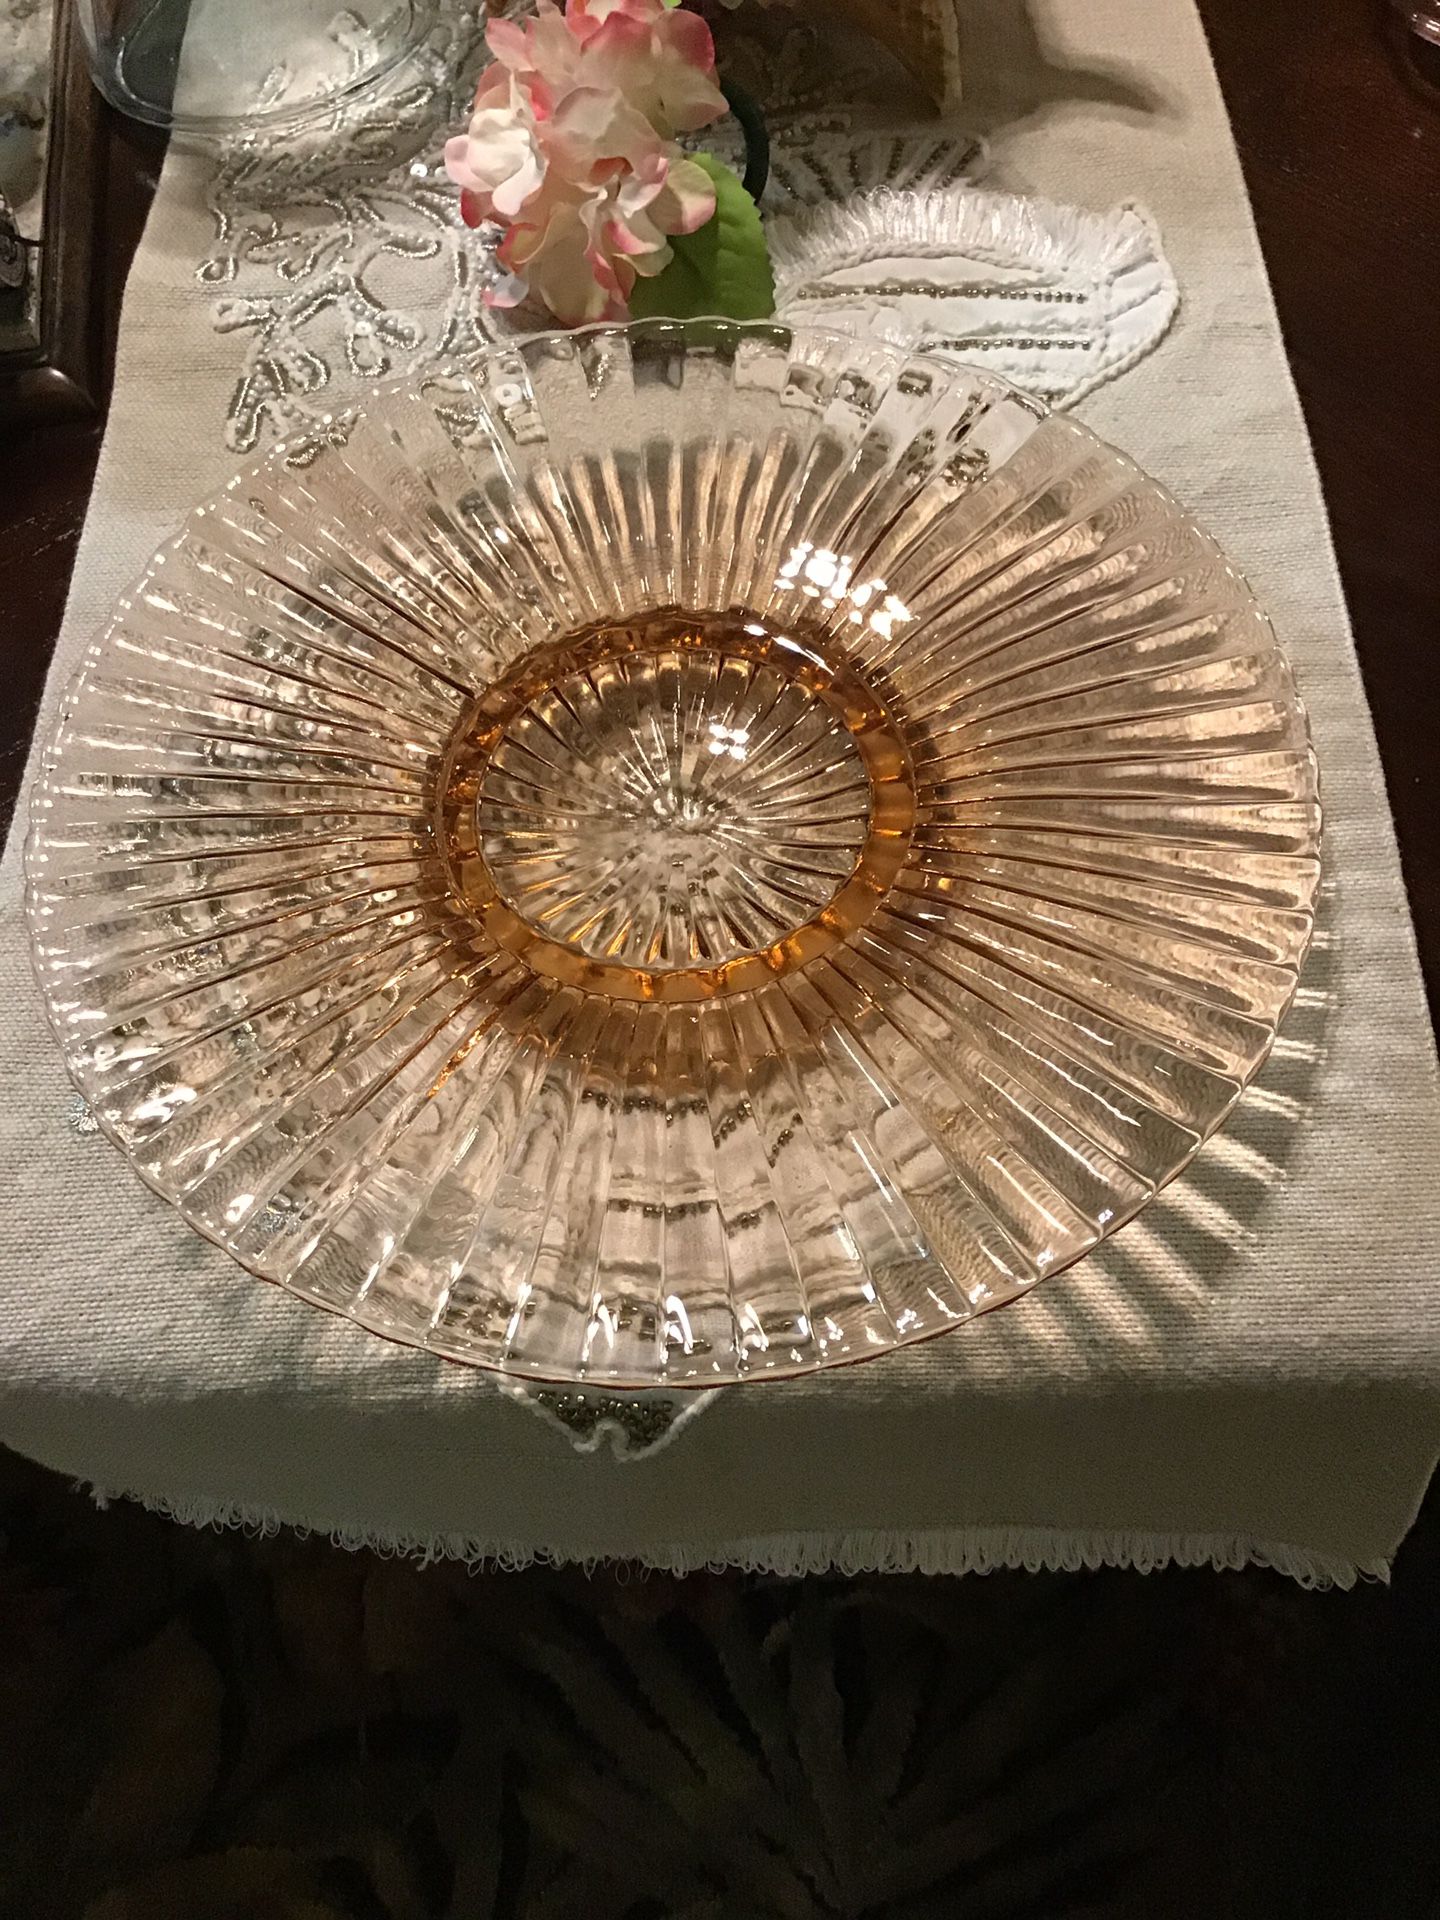 Antique pink Depression glass platter from the early 1900s